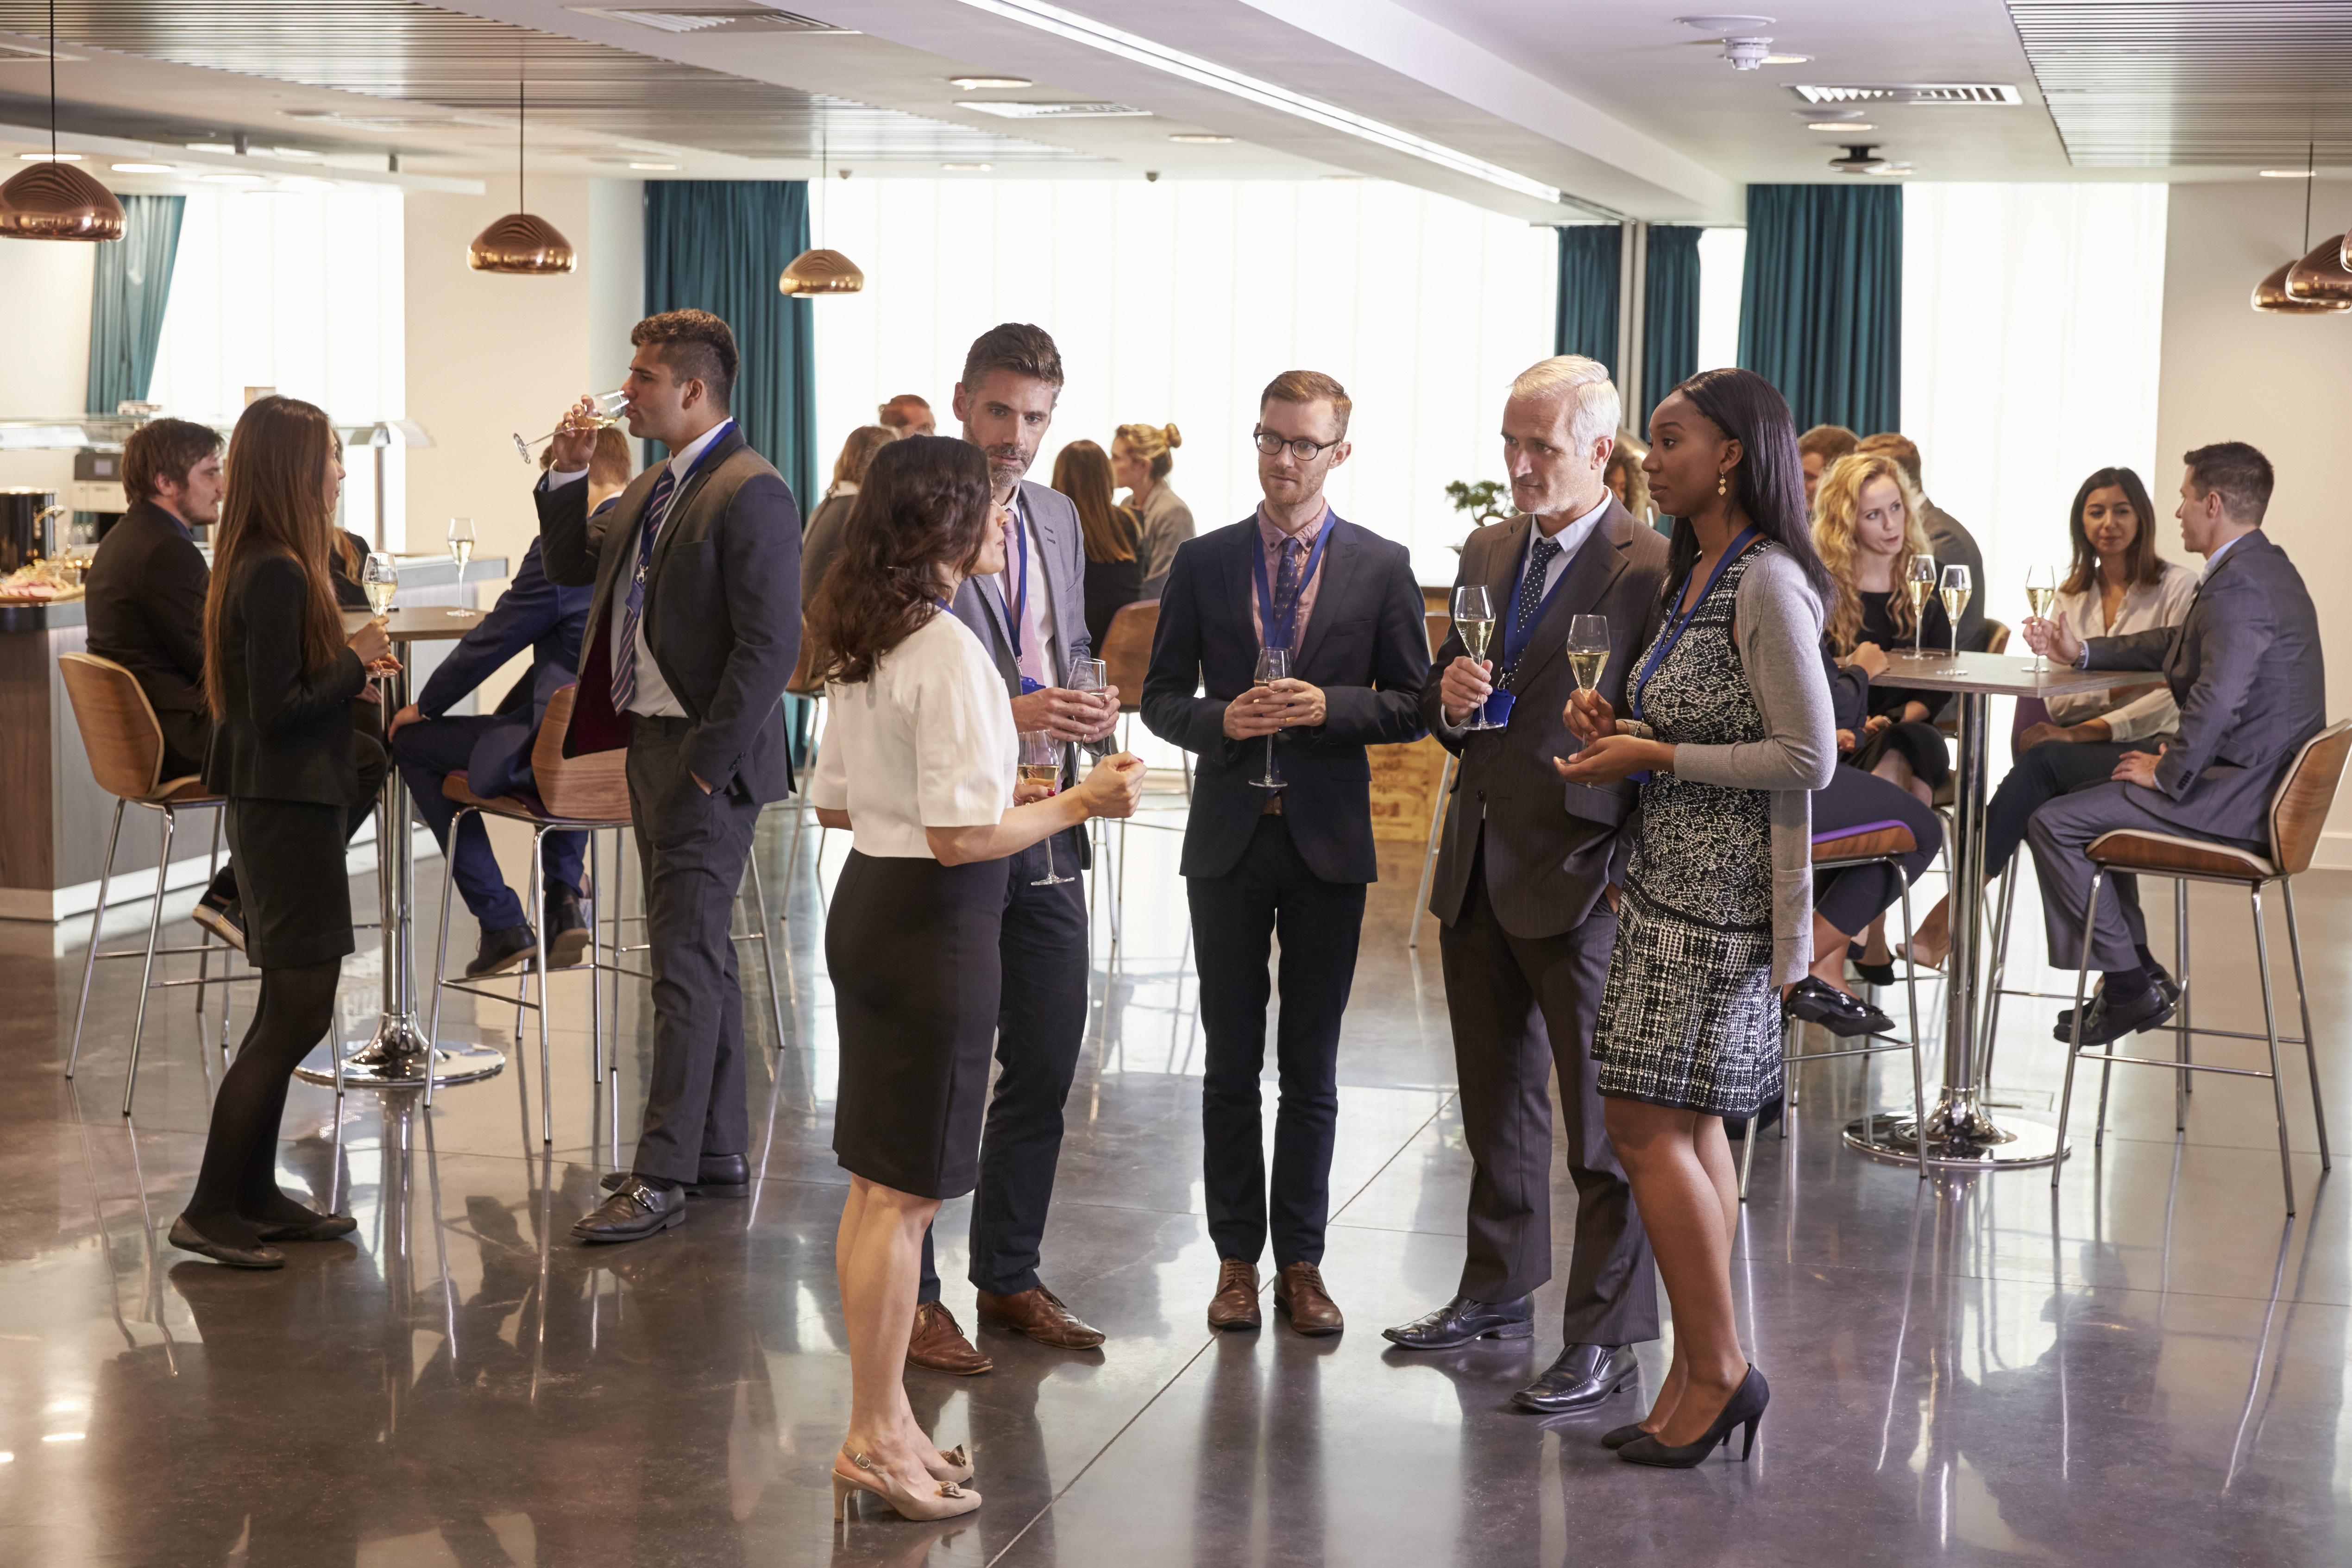 Top 3 Networking Events In Cornwall That You Don't Want To Miss!